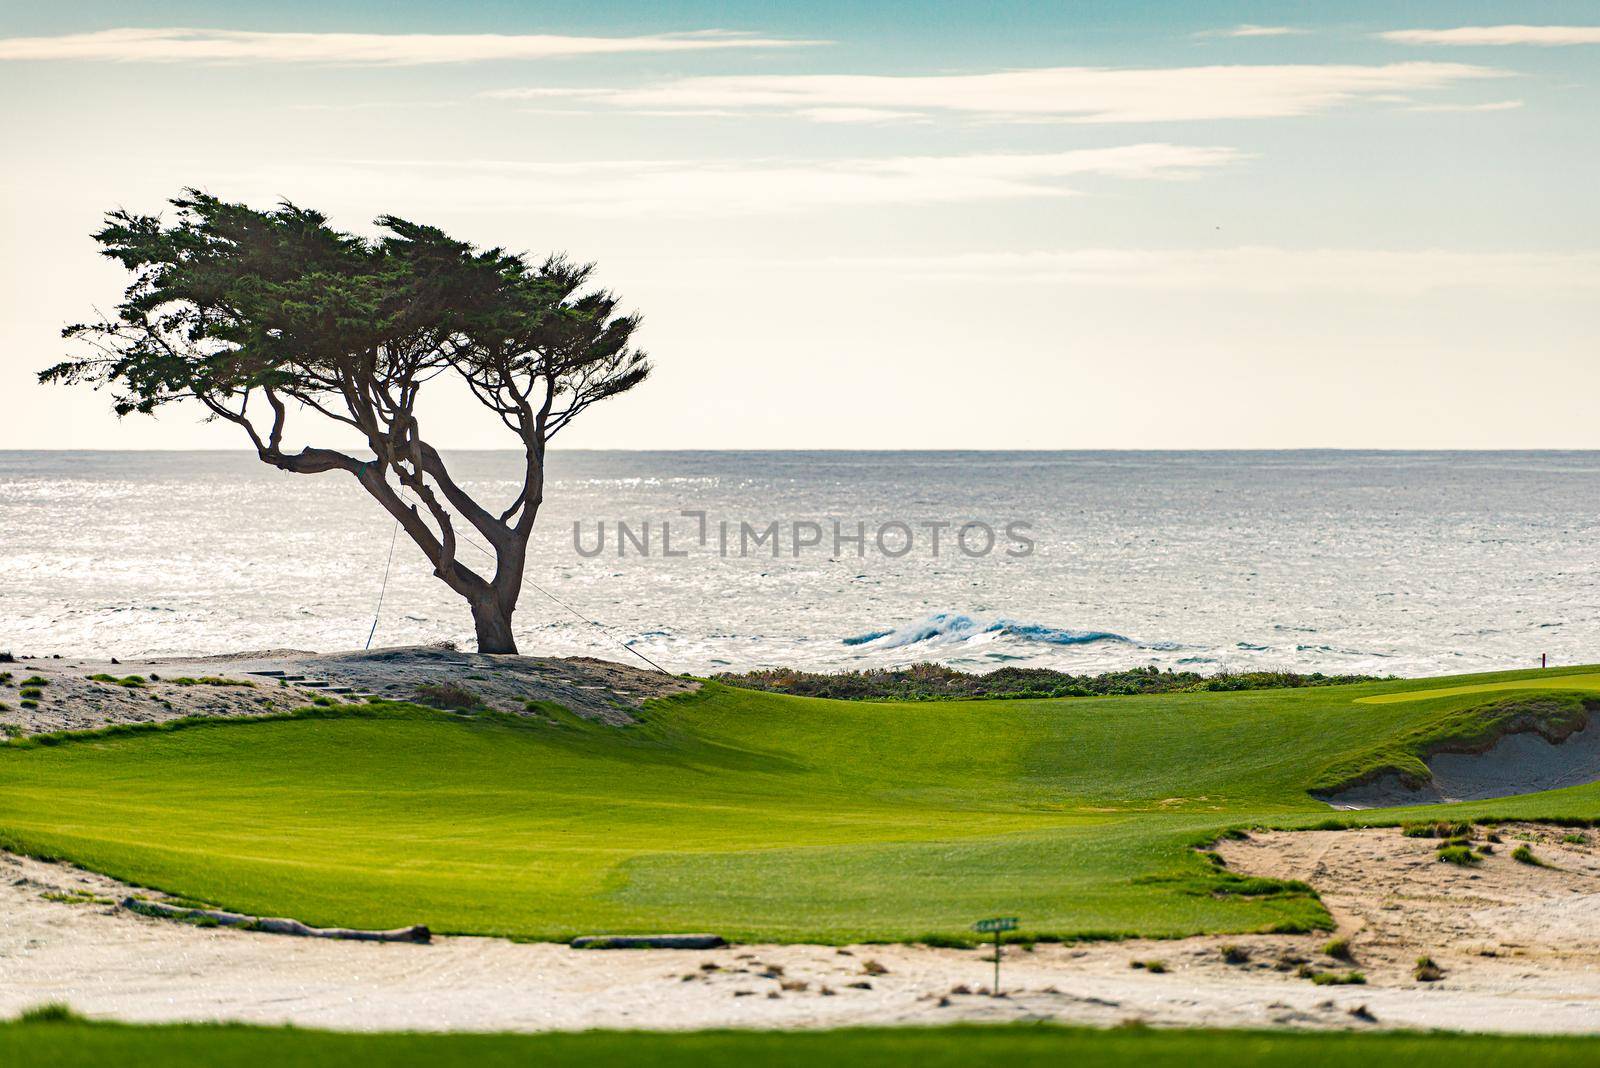 Tree on golf course with ocean in background in California, United States of America